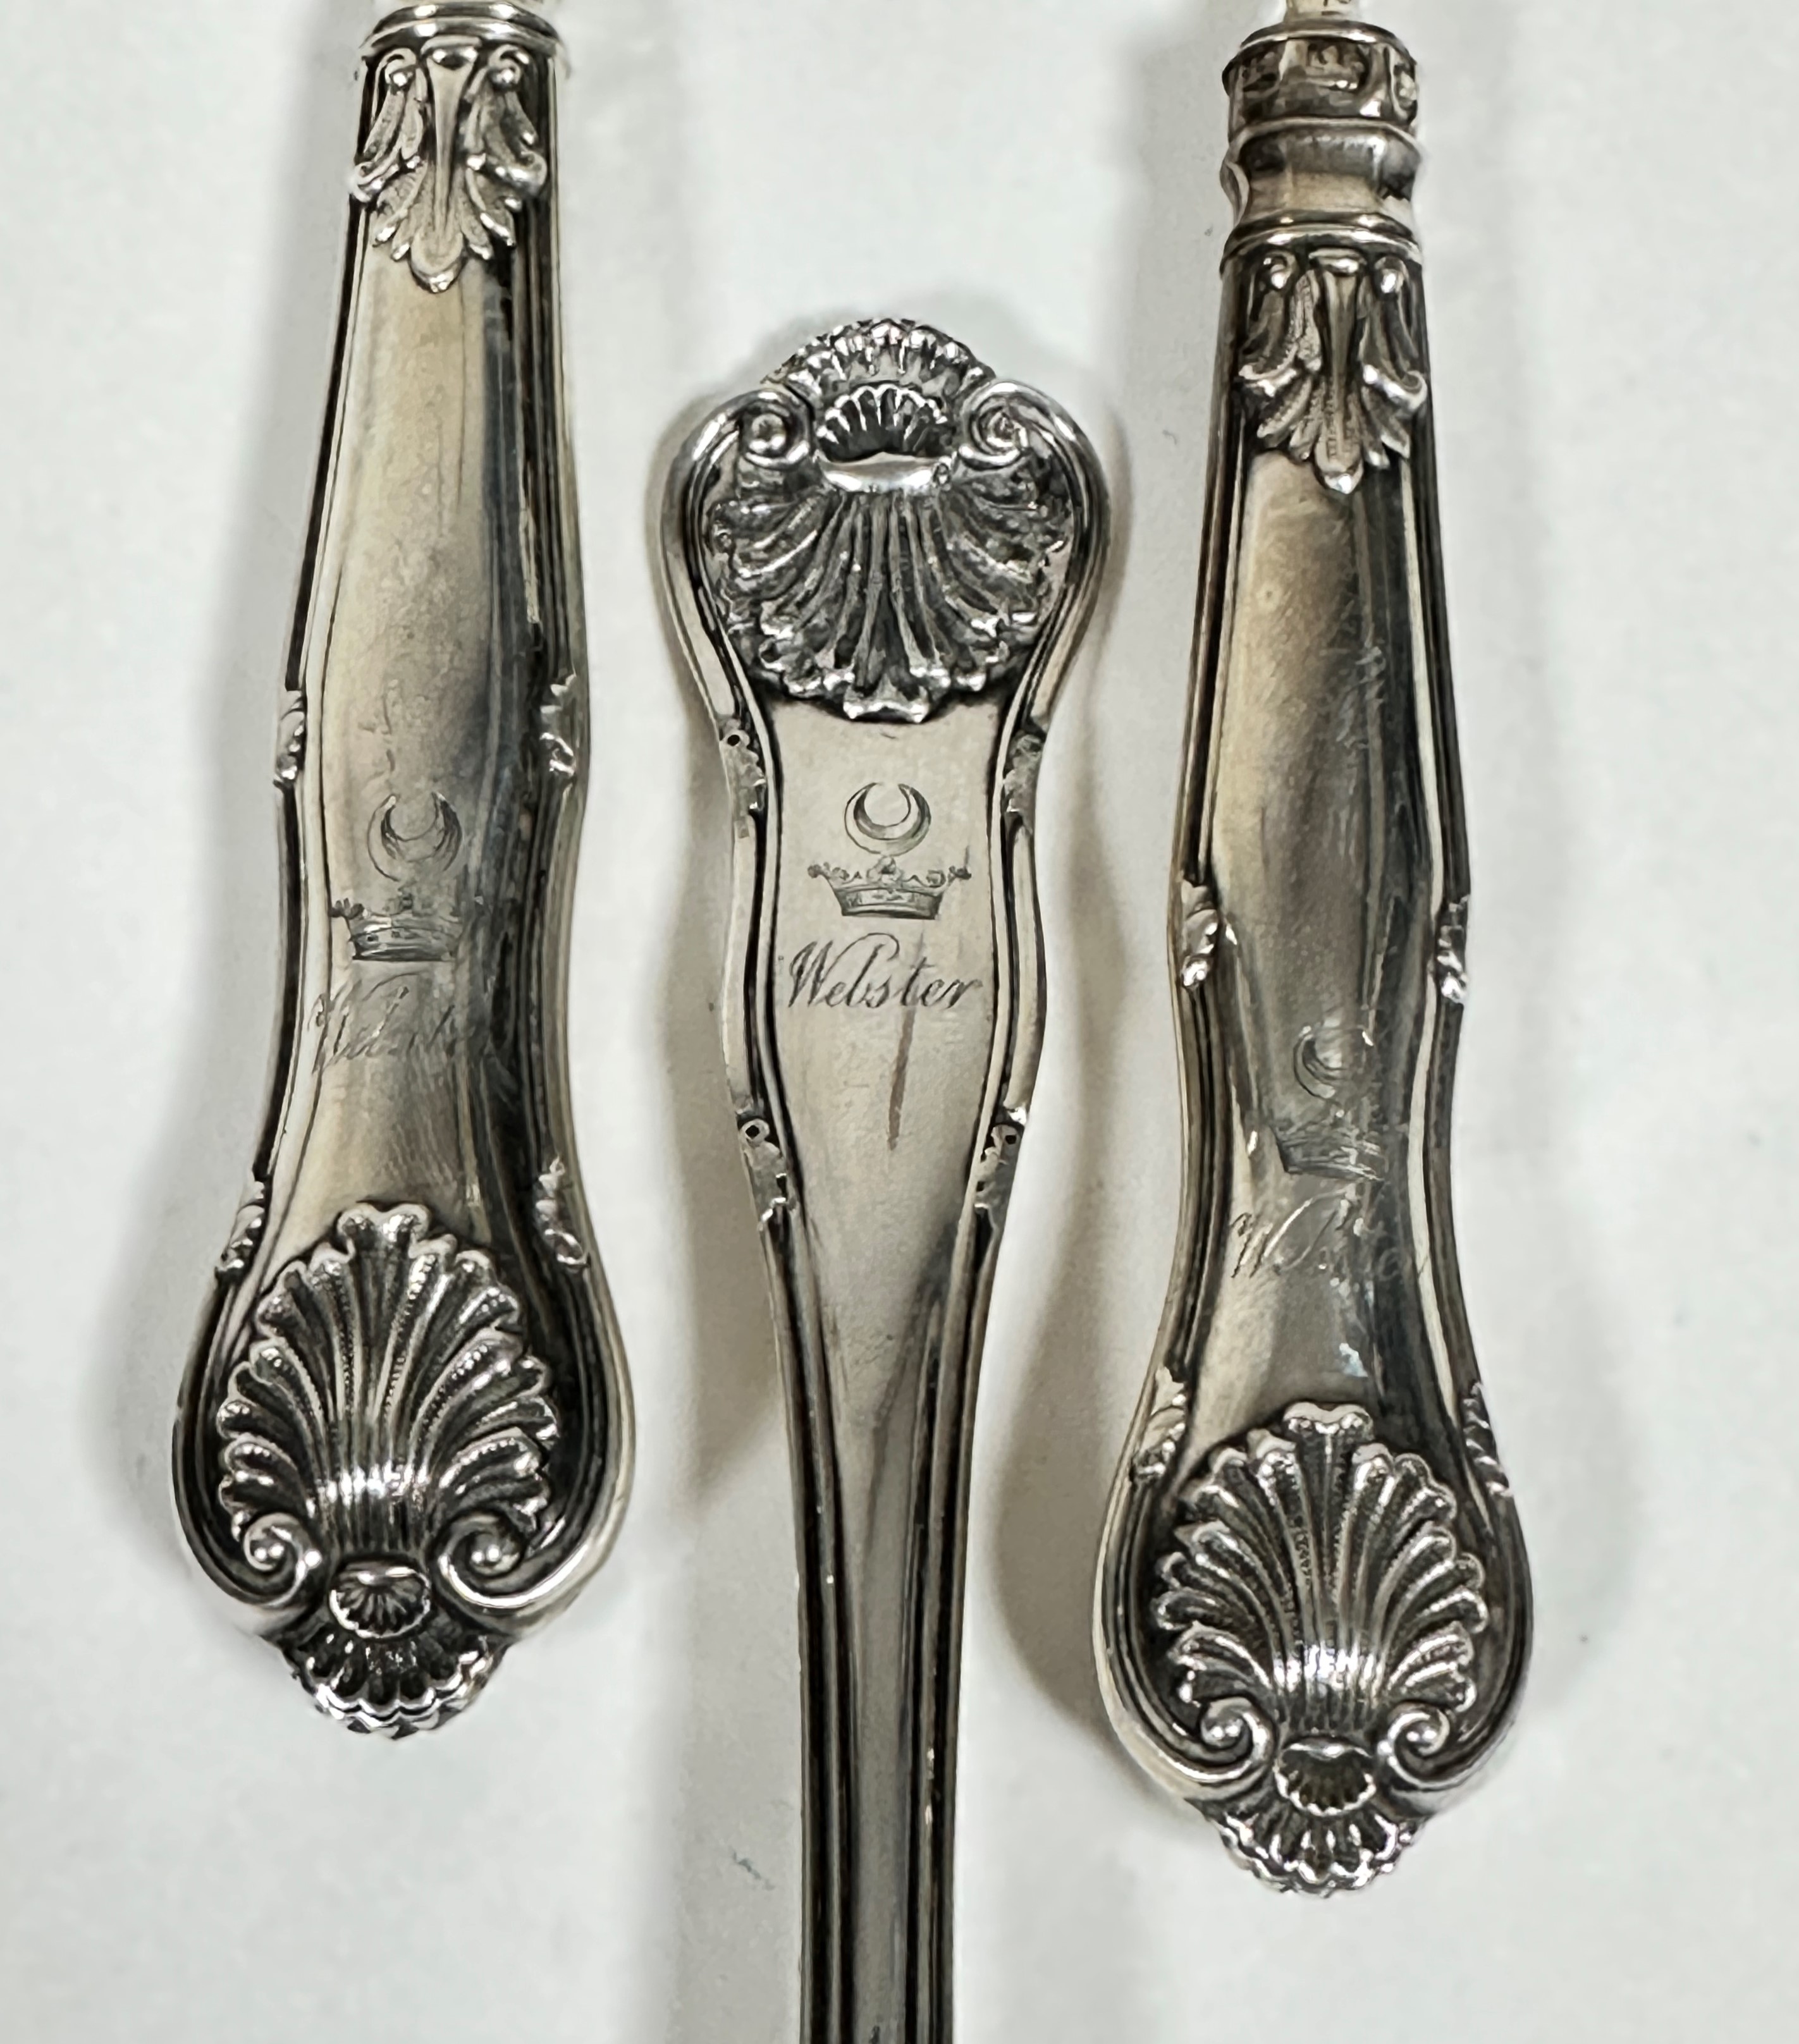 An Irish Dublin 1818 silver Fiddle, Shell and Thread pattern table spoon with engraved griffin - Image 3 of 7